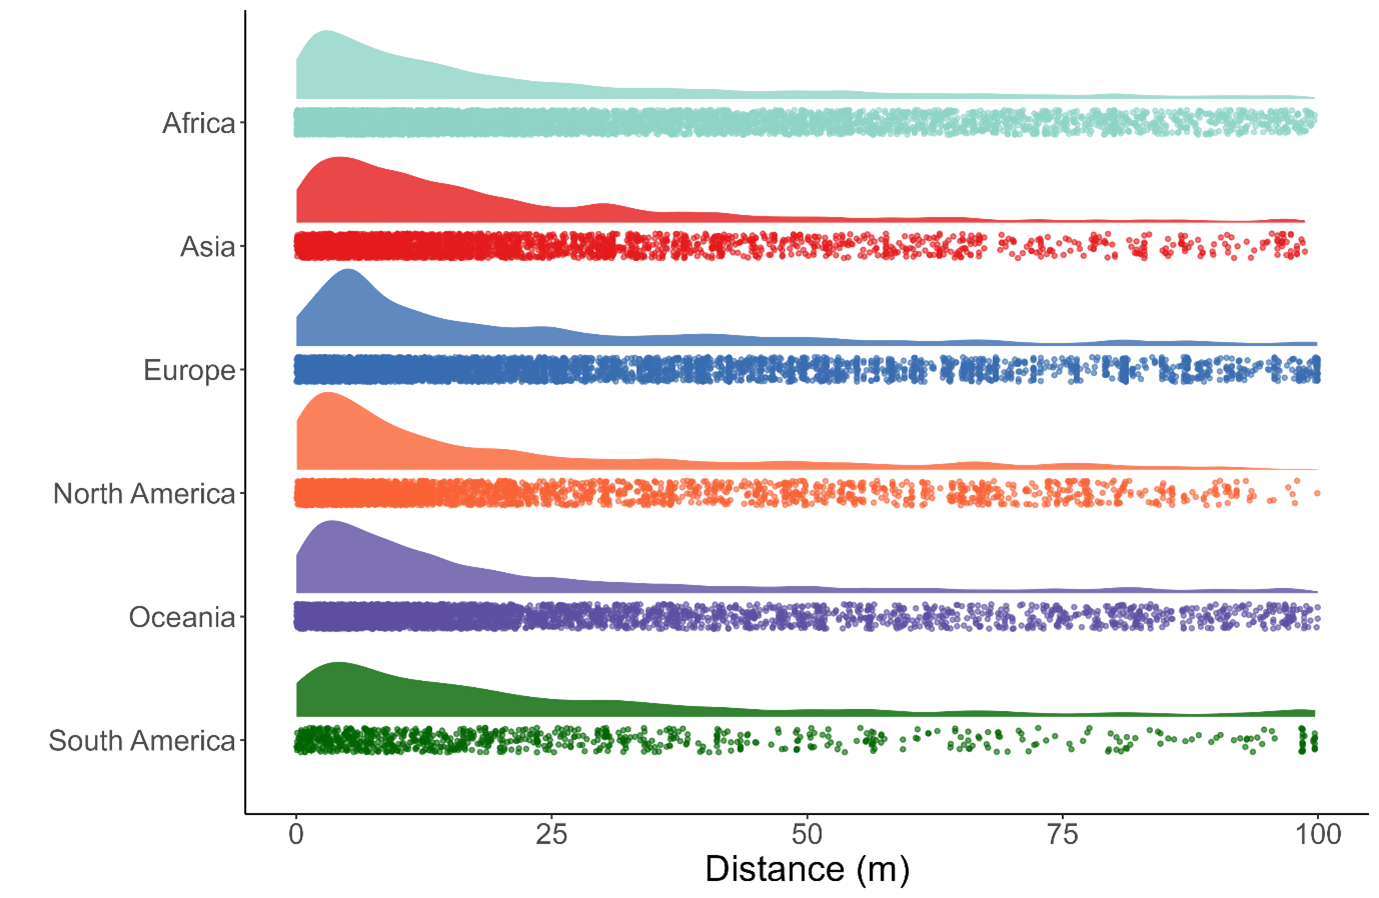 A stacked density plot with distance from a road between 0 and 100m on the x axis and the different continents on the y axis. All continents included (Africa, Asia, Europe, North America, Oceania & South America), have the peak of collection density between 0 and 25m from the road. For Europe the peak is slightly closer towards 10m away from a road than the other continents which show the peak closer to 5m.